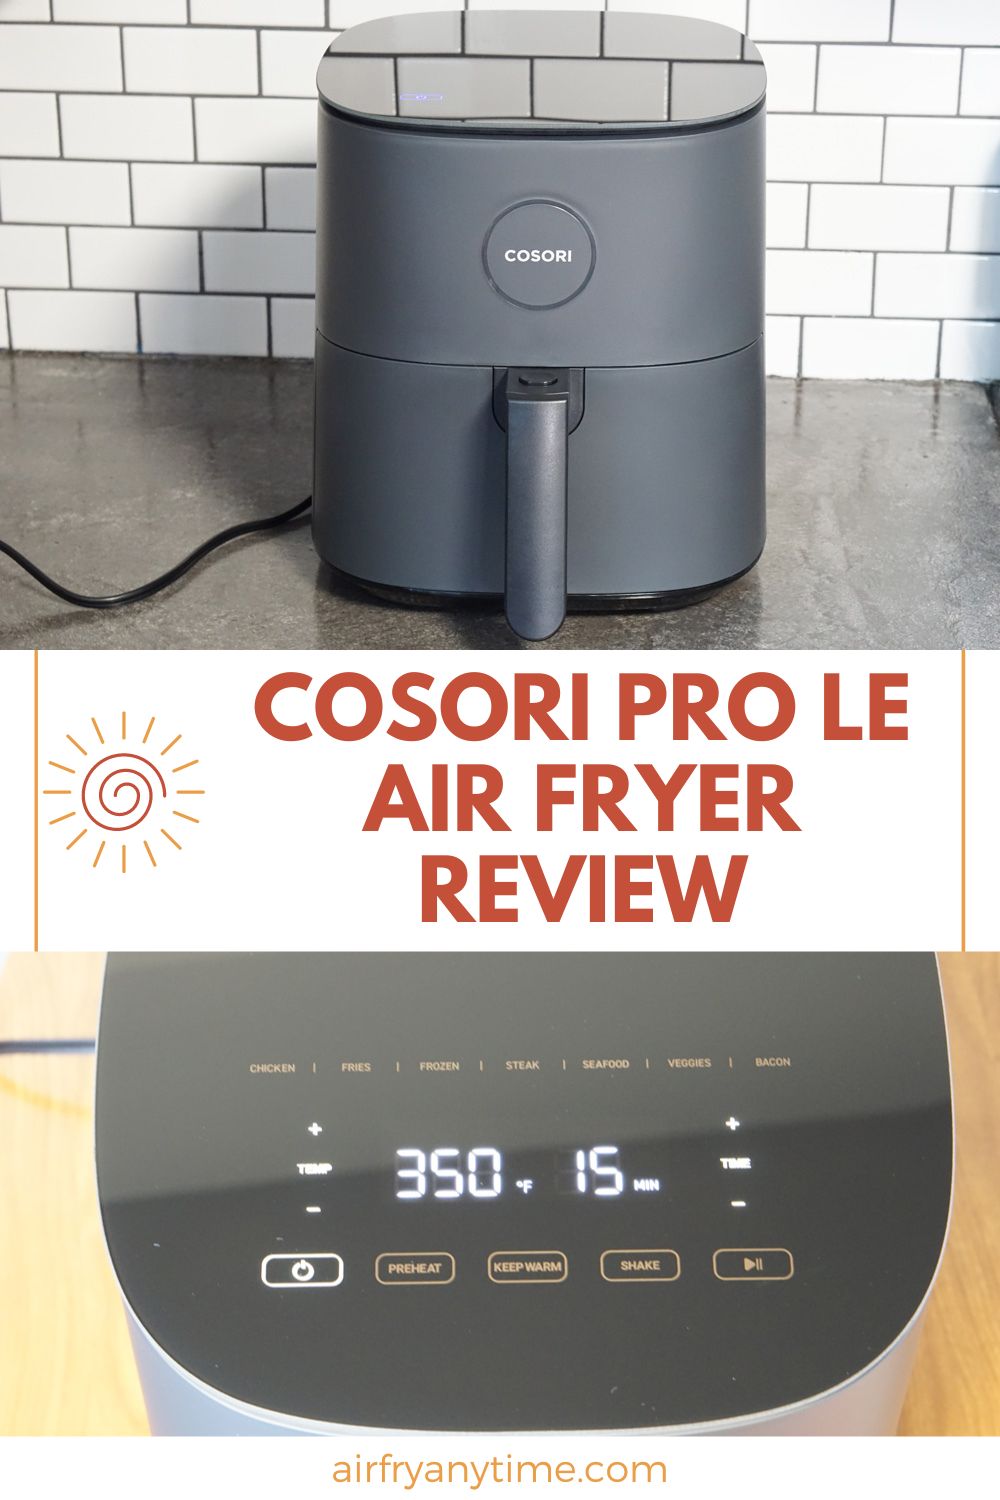 Cosori air fryer and the top display panel